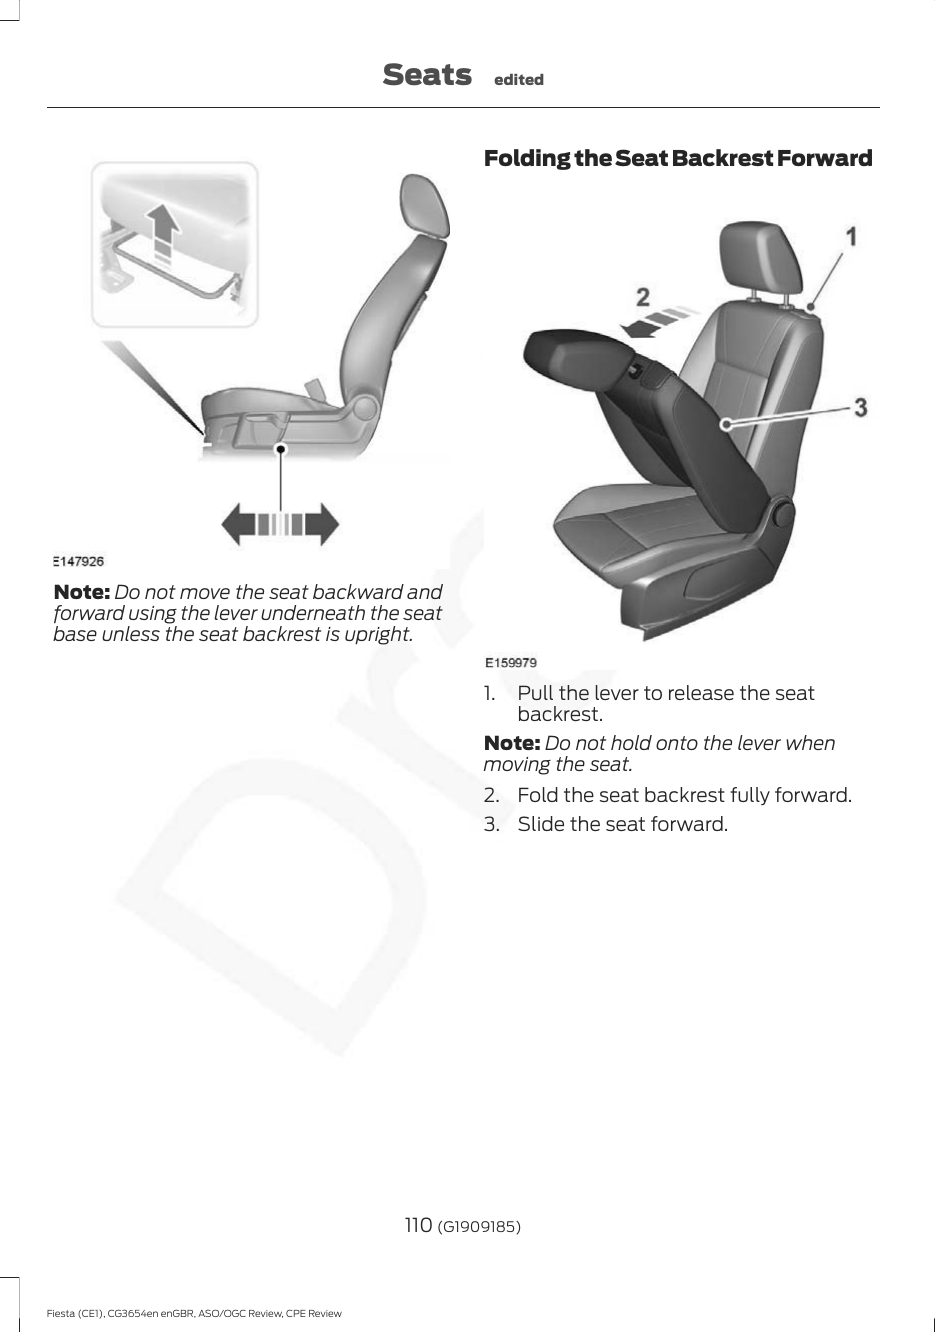 Note: Do not move the seat backward andforward using the lever underneath the seatbase unless the seat backrest is upright.Folding the Seat Backrest Forward1. Pull the lever to release the seatbackrest.Note: Do not hold onto the lever whenmoving the seat.2. Fold the seat backrest fully forward.3. Slide the seat forward.110 (G1909185)Fiesta (CE1), CG3654en enGBR, ASO/OGC Review, CPE ReviewSeats edited